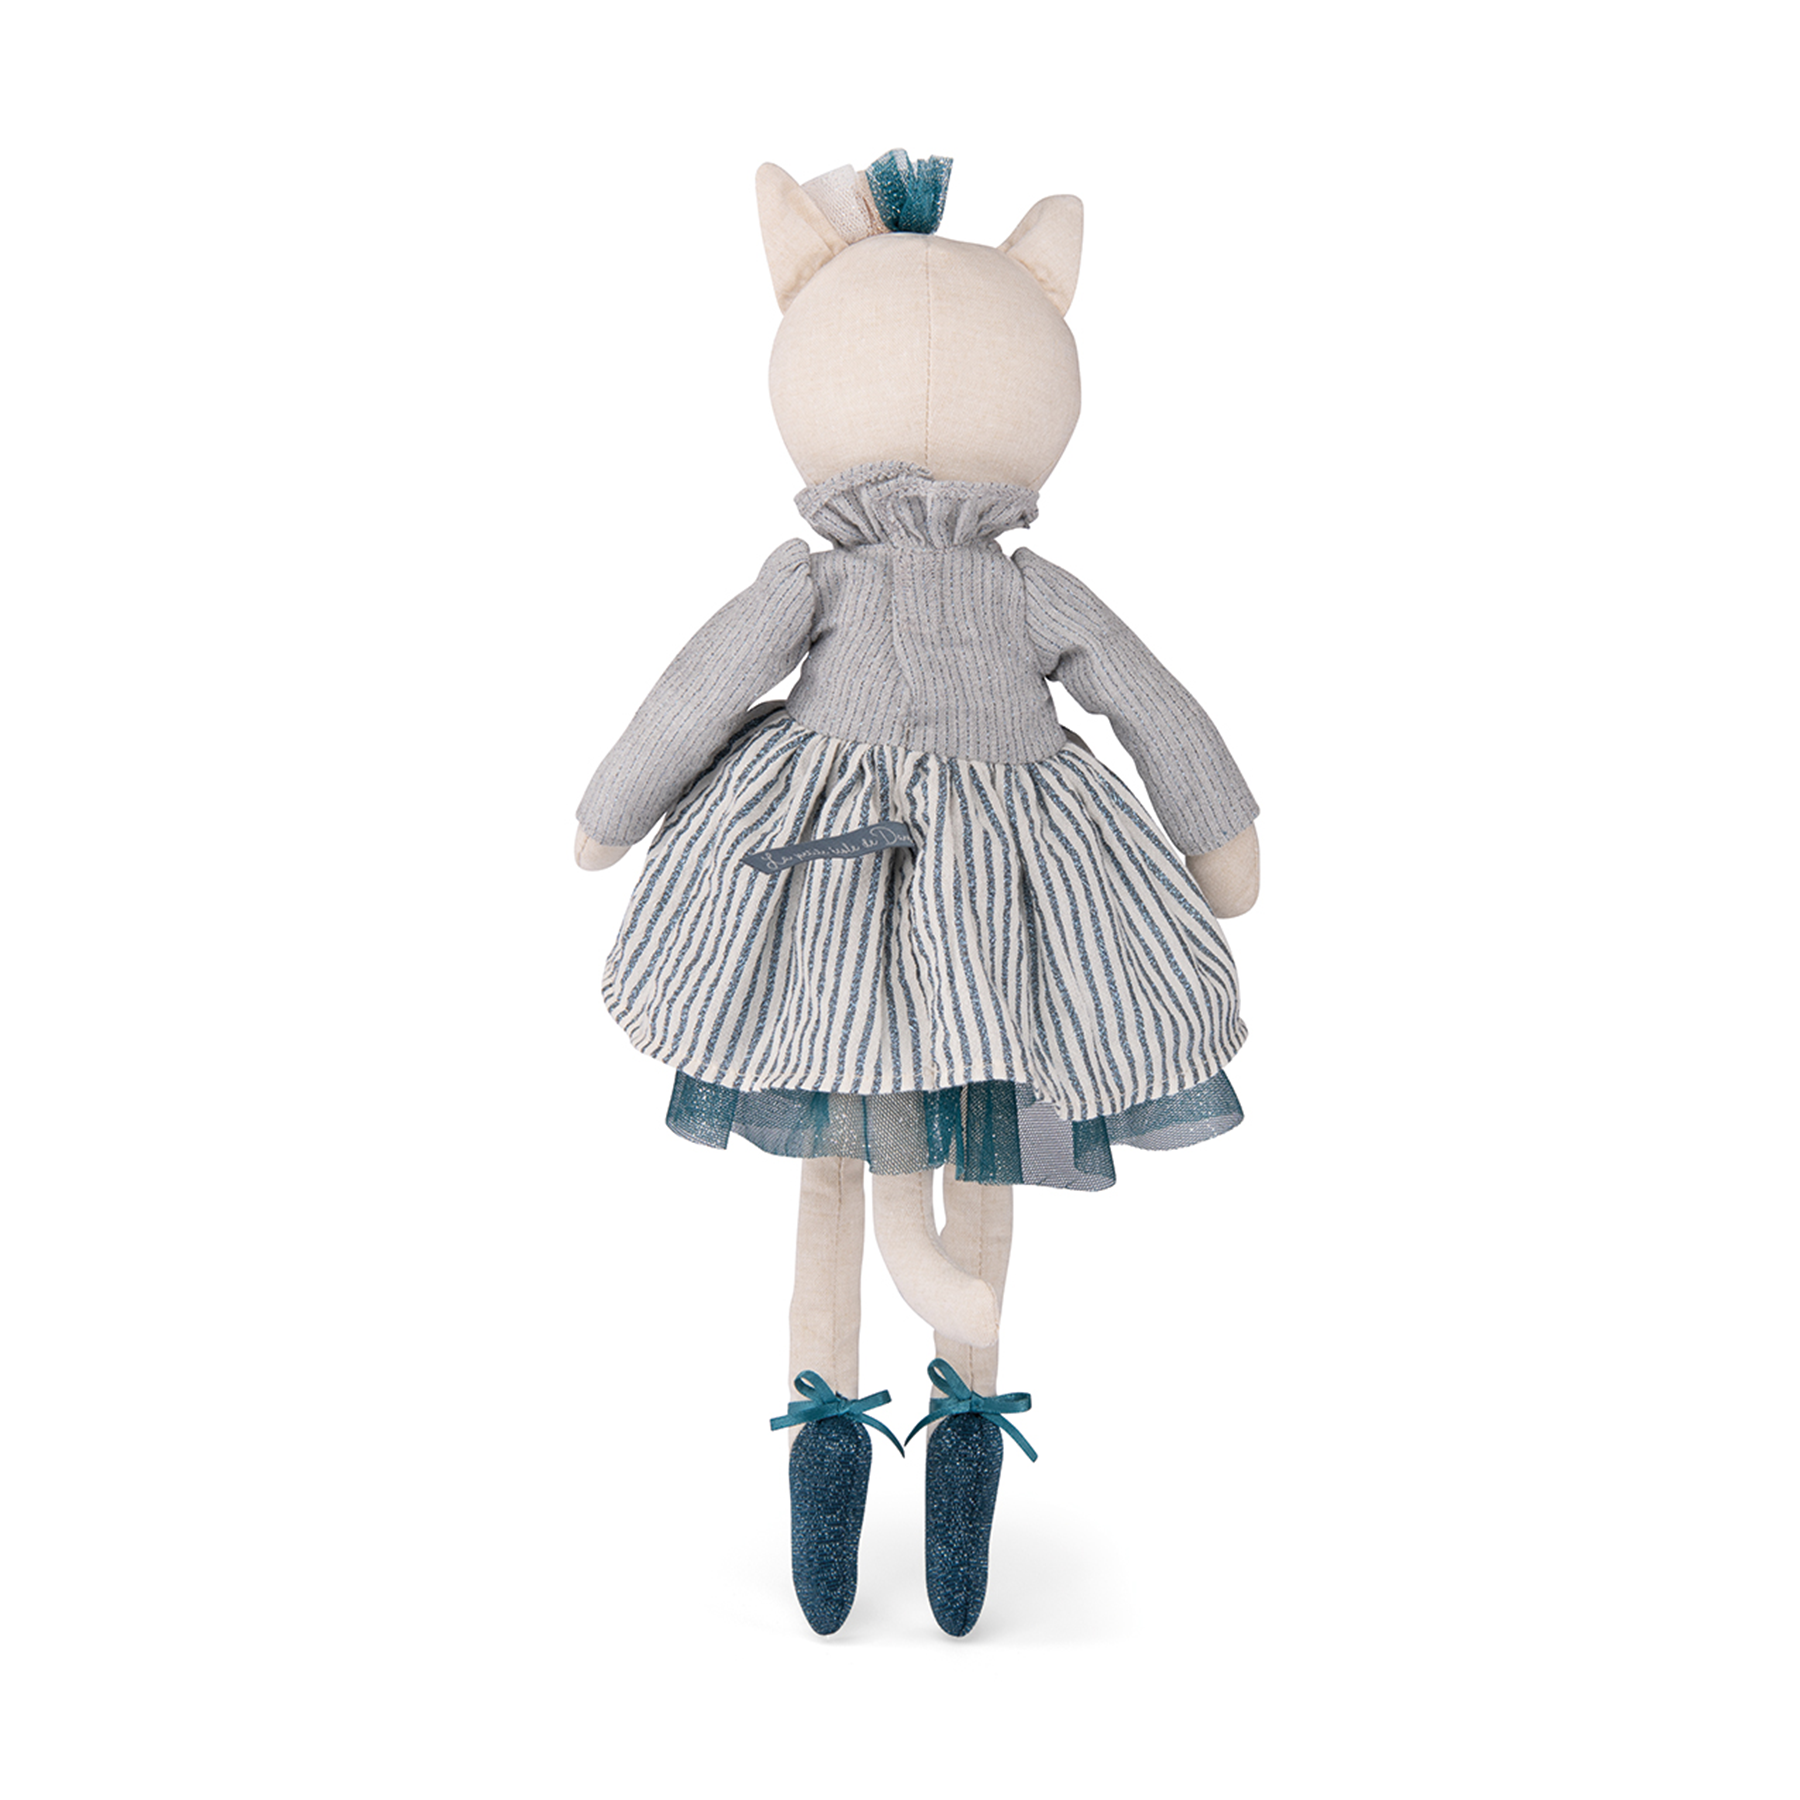 Célestine is a beautiful fabric cat doll with a lovely embroidered face she is dressed in a dancer's outfit: tutu, tulle bow in her hair, ballet slippers with ribbons.